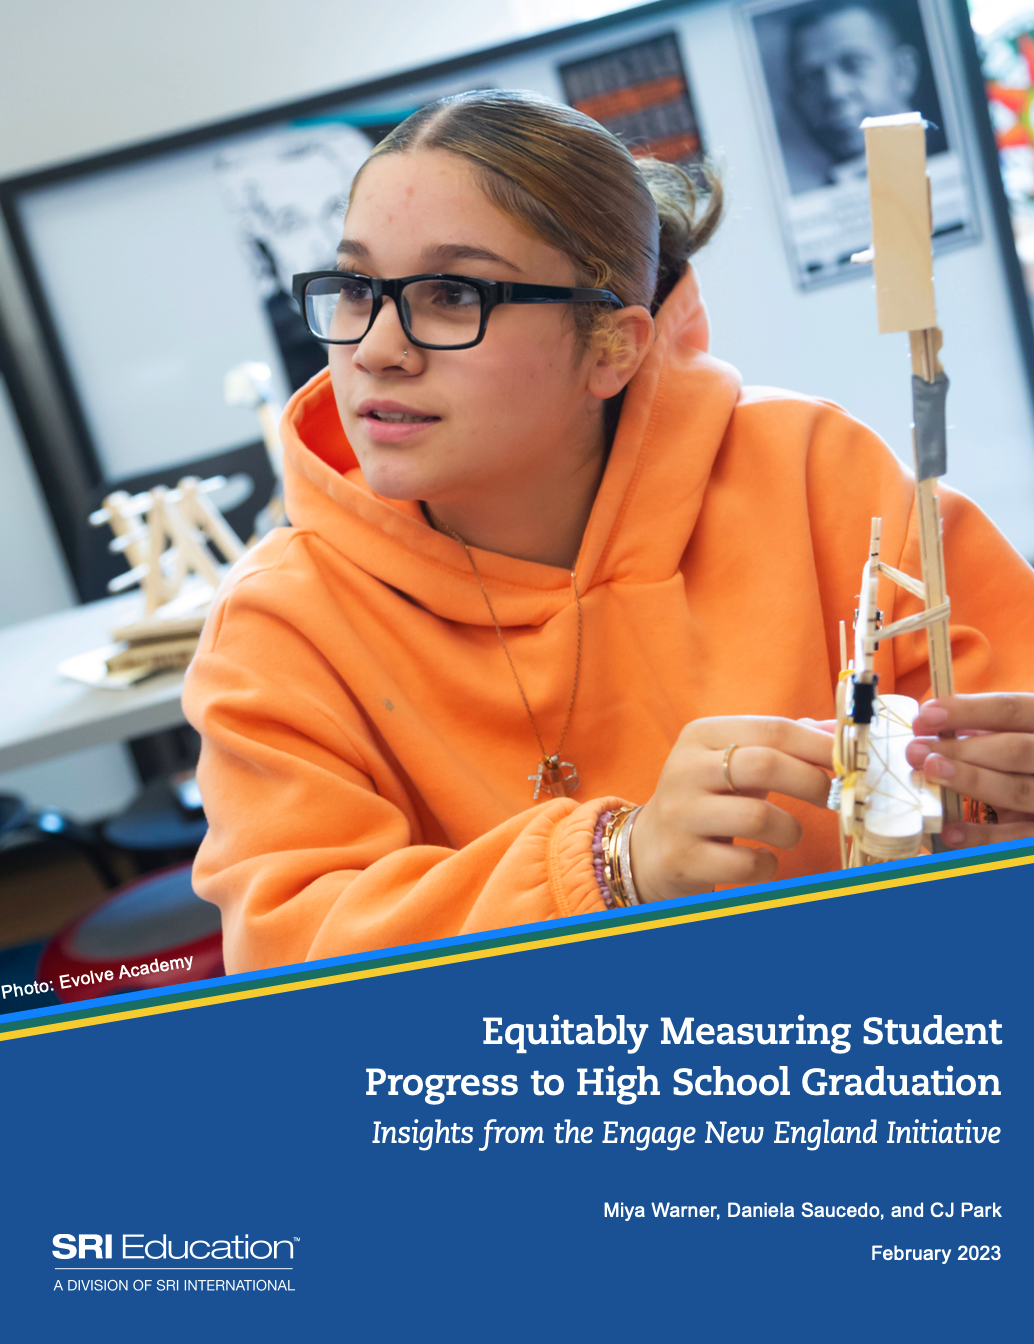 Equitably Measuring Student Progress to Graduation: Insights from the Engage New England Initiative